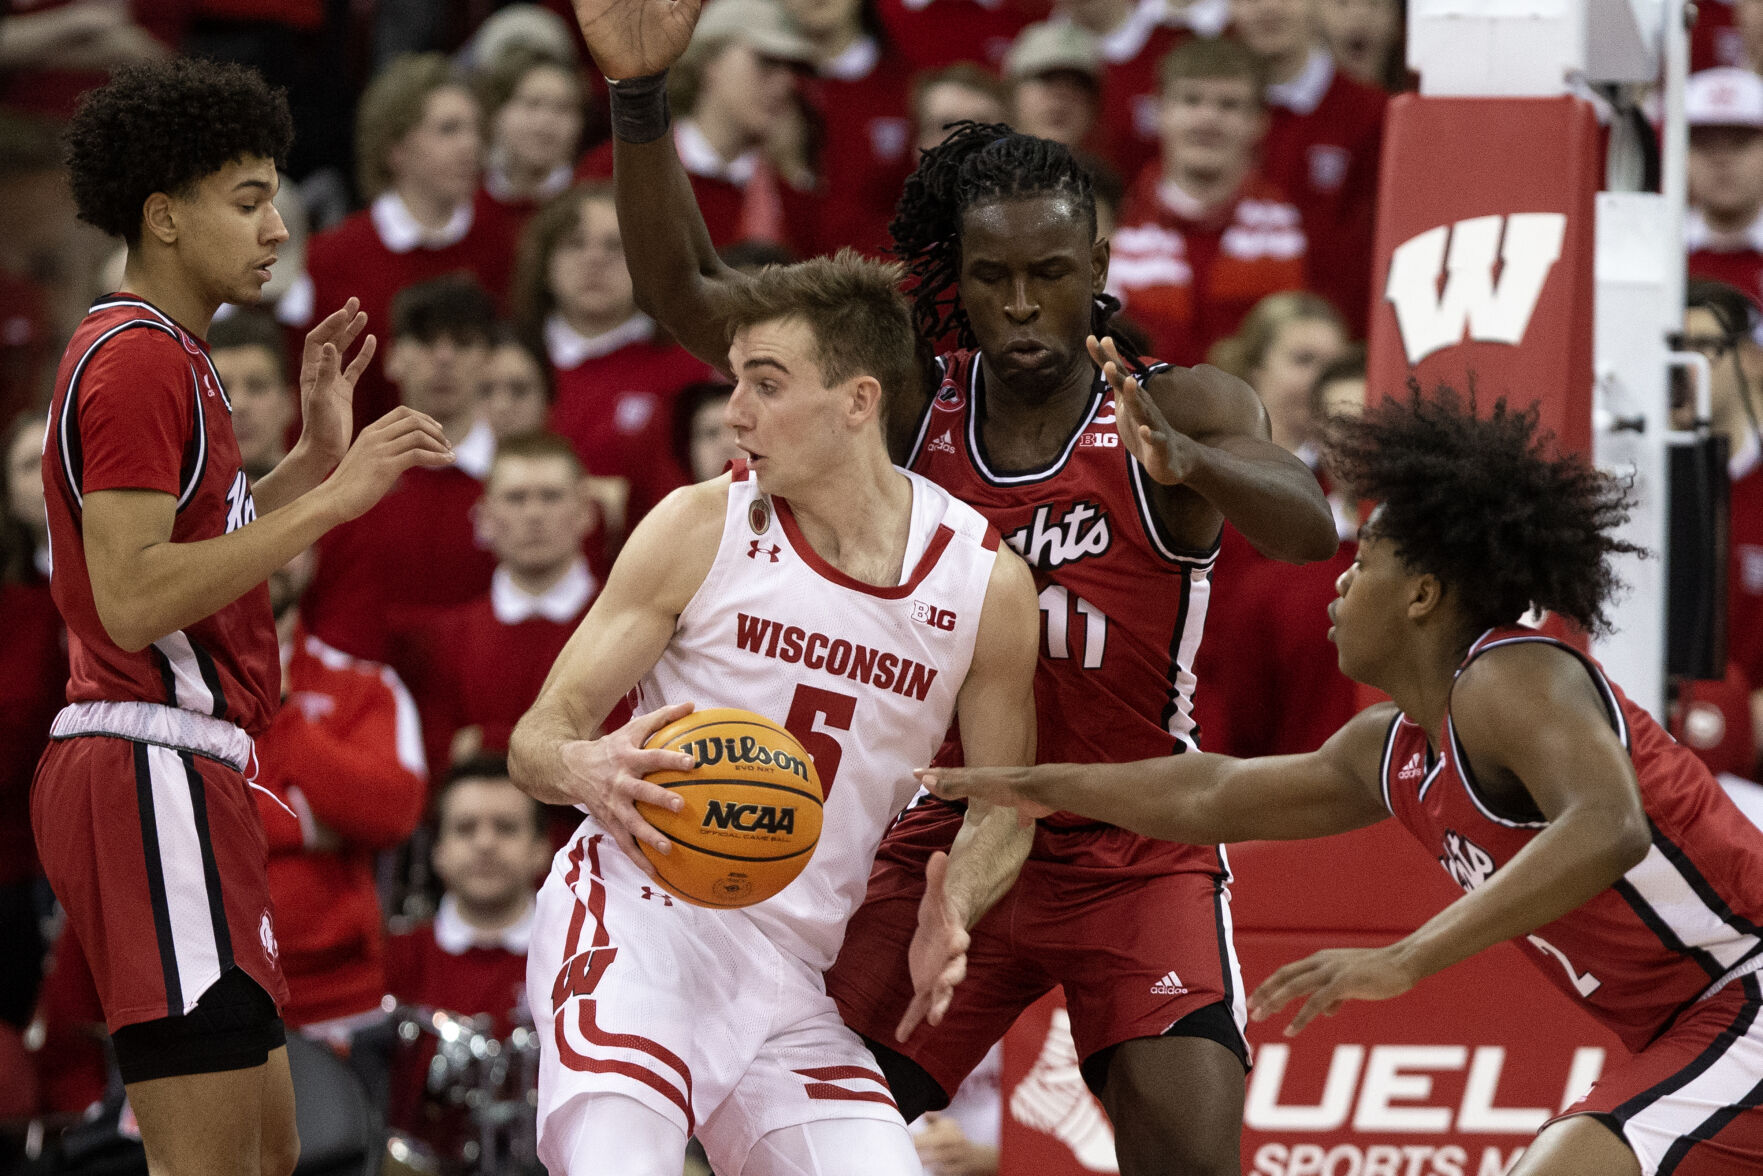 Winter storm forecast hasnt disrupted Wisconsin-Iowa mens basketball game